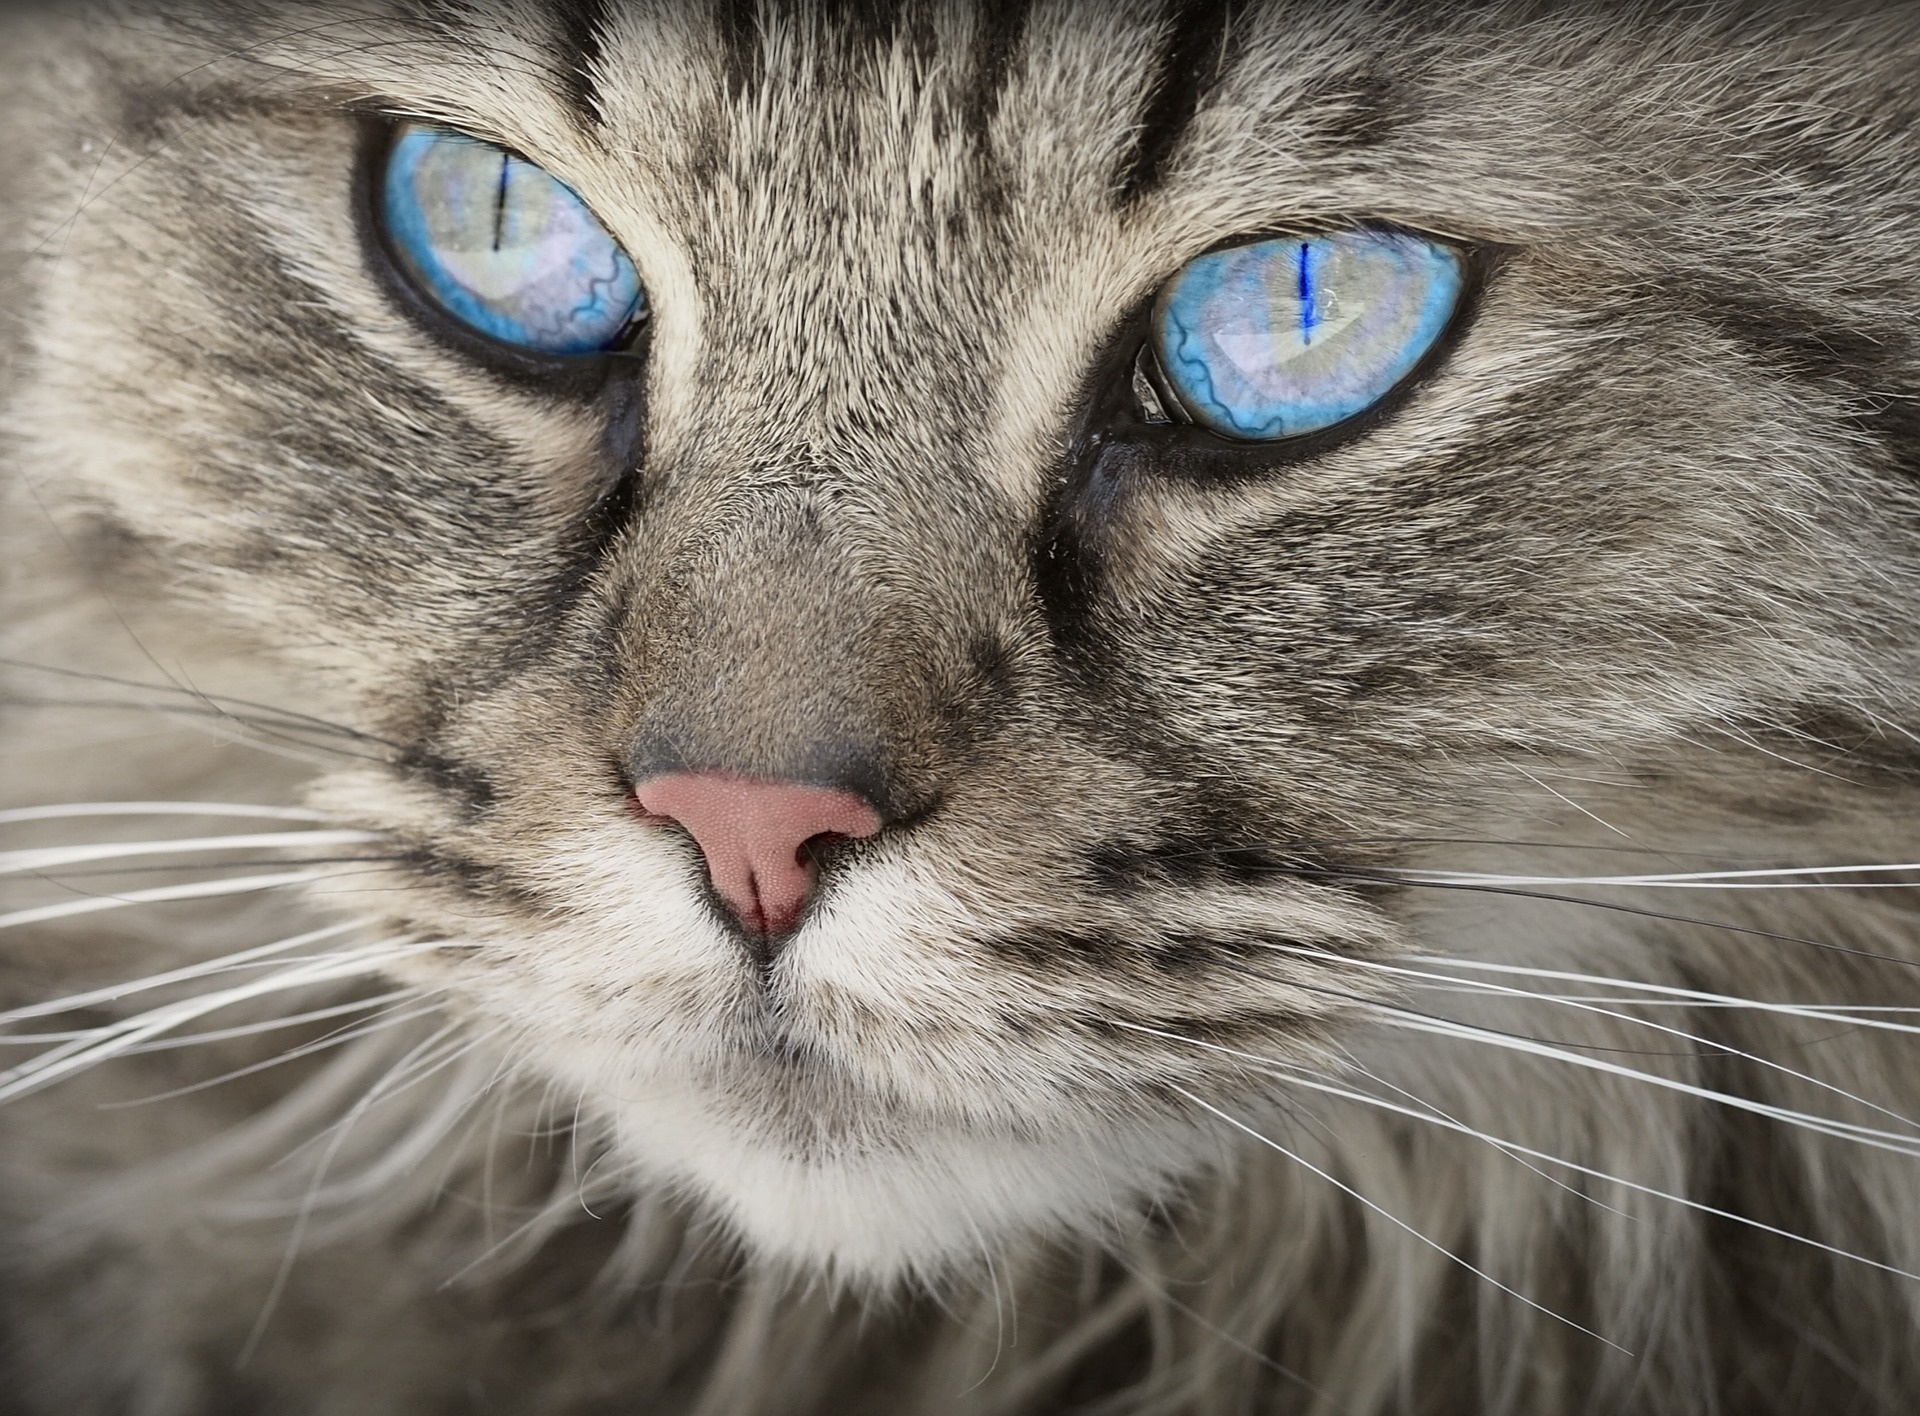 A grey cat with blue eyes